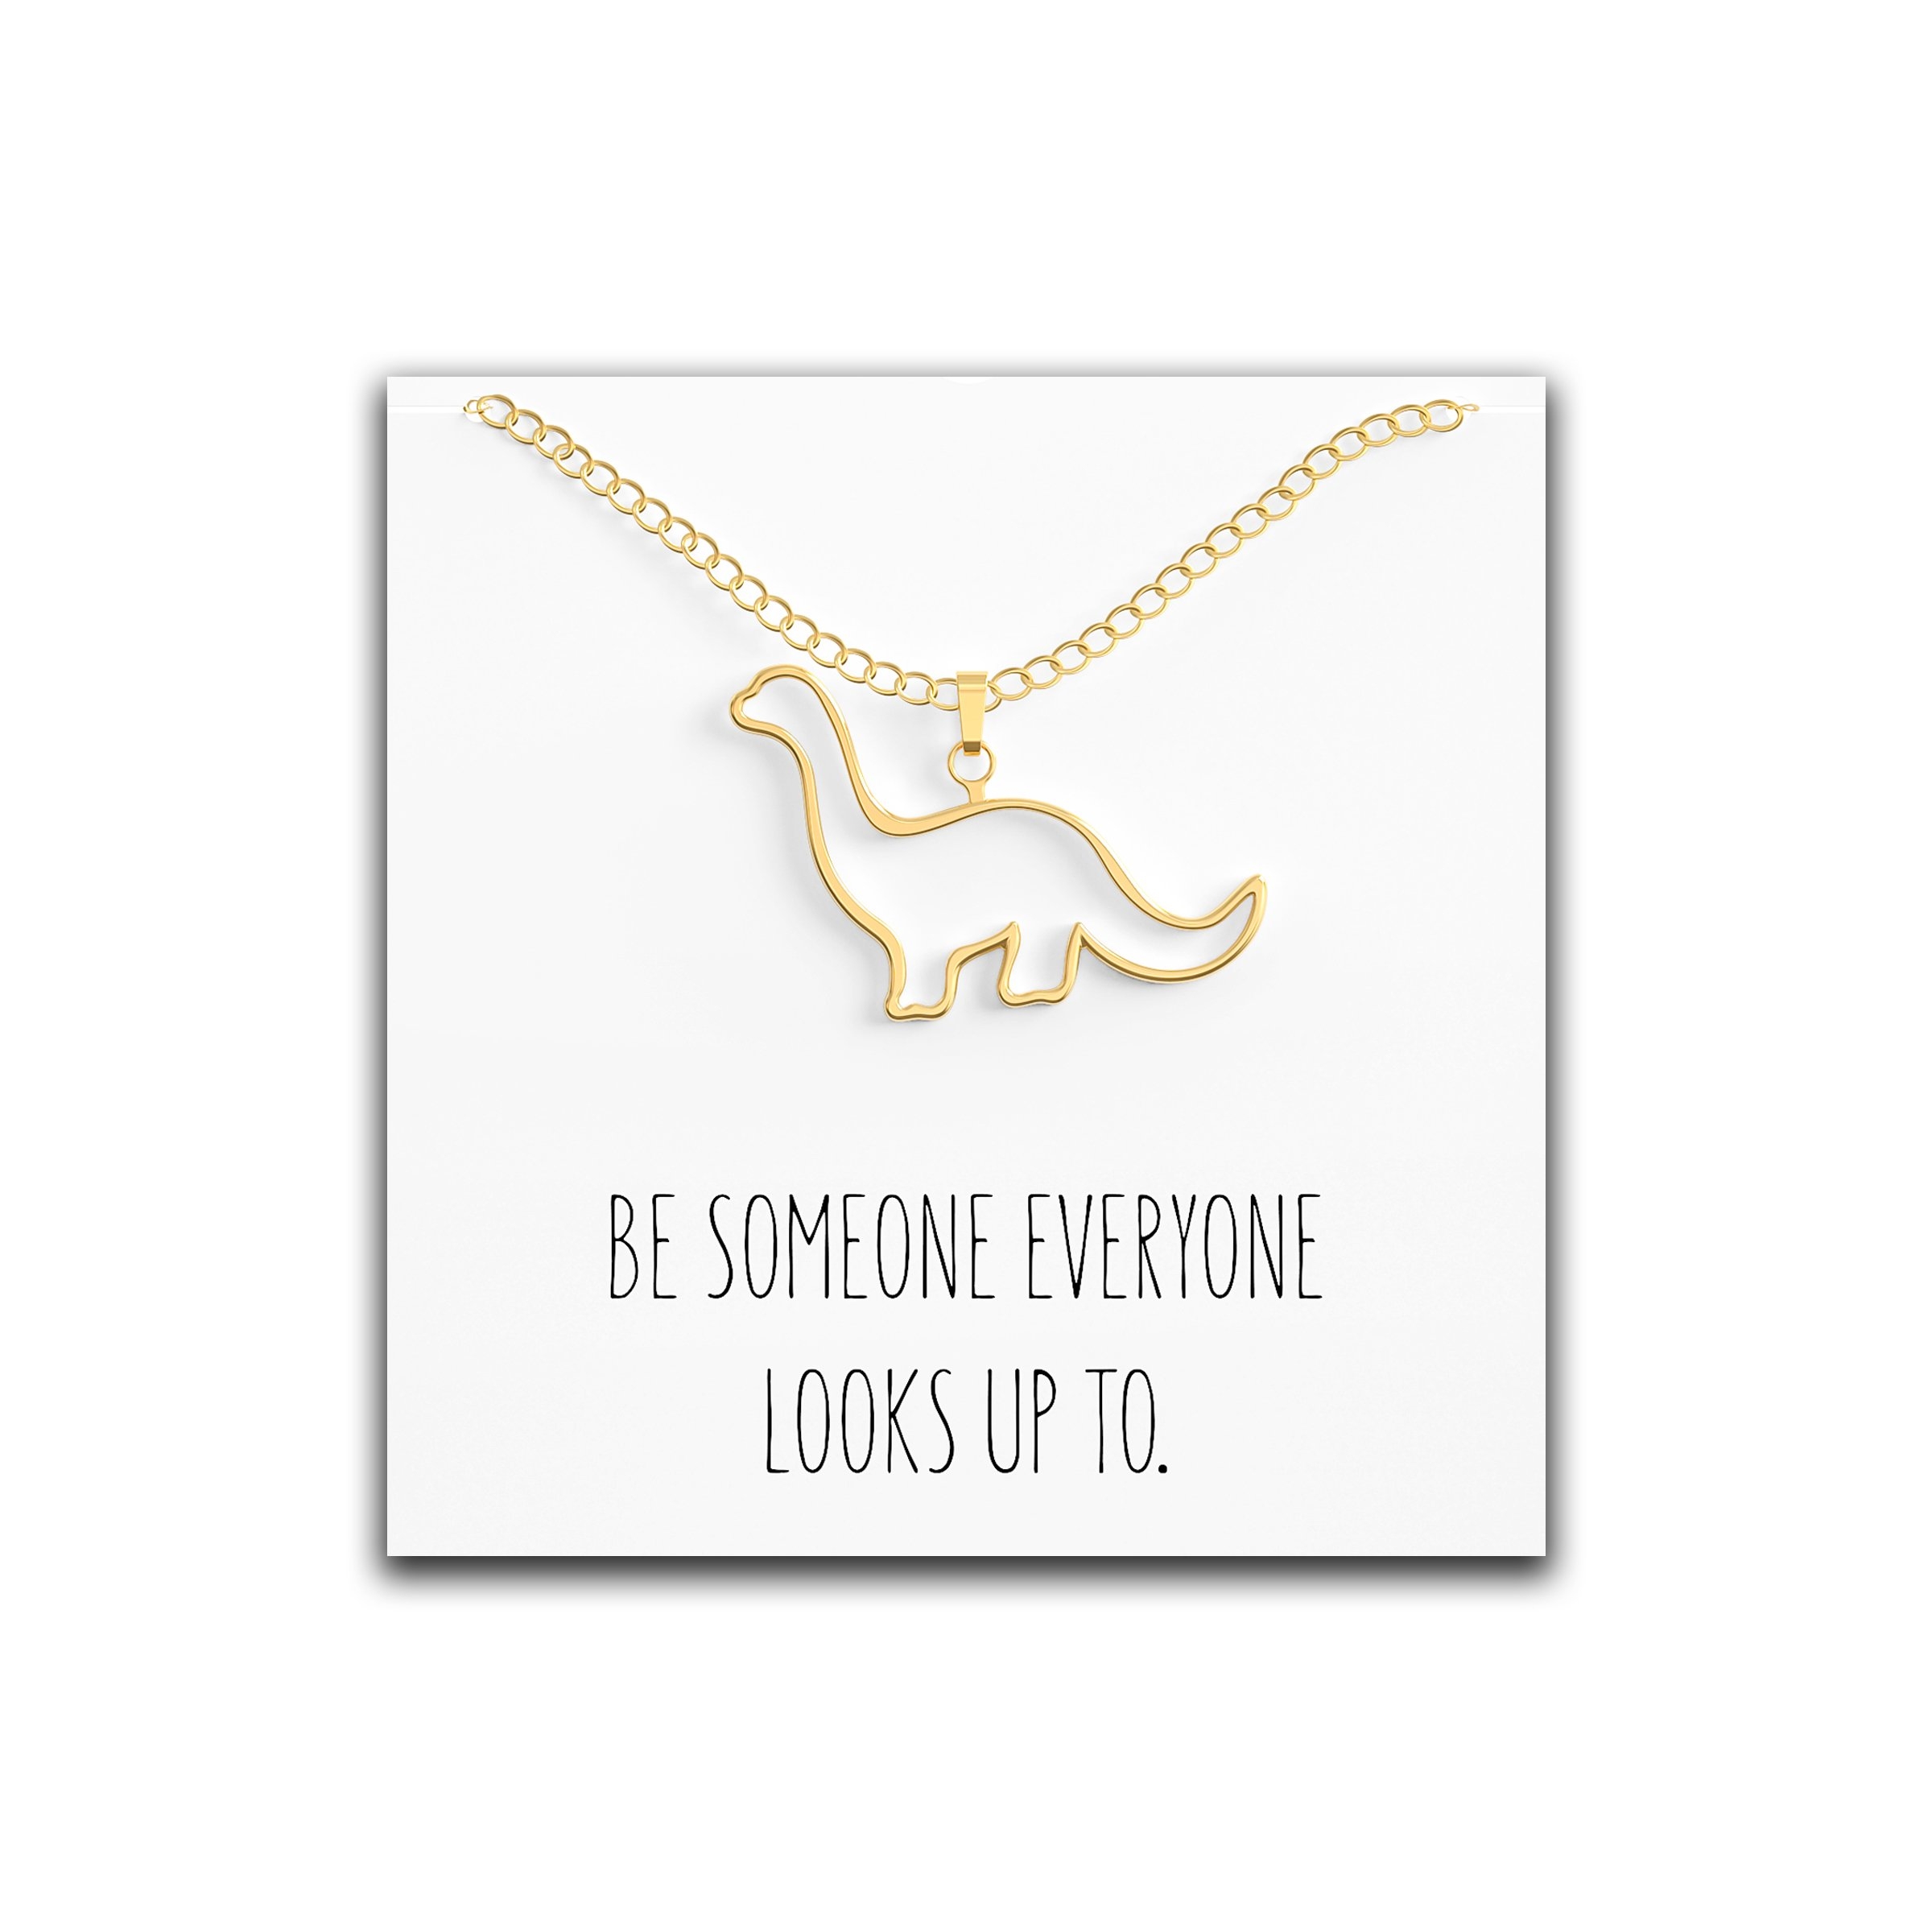 Dinosaur Brontosaurus Necklace – Cute Pendant Gift – Sweet & Funny Message Card Gold – Happy Kisses